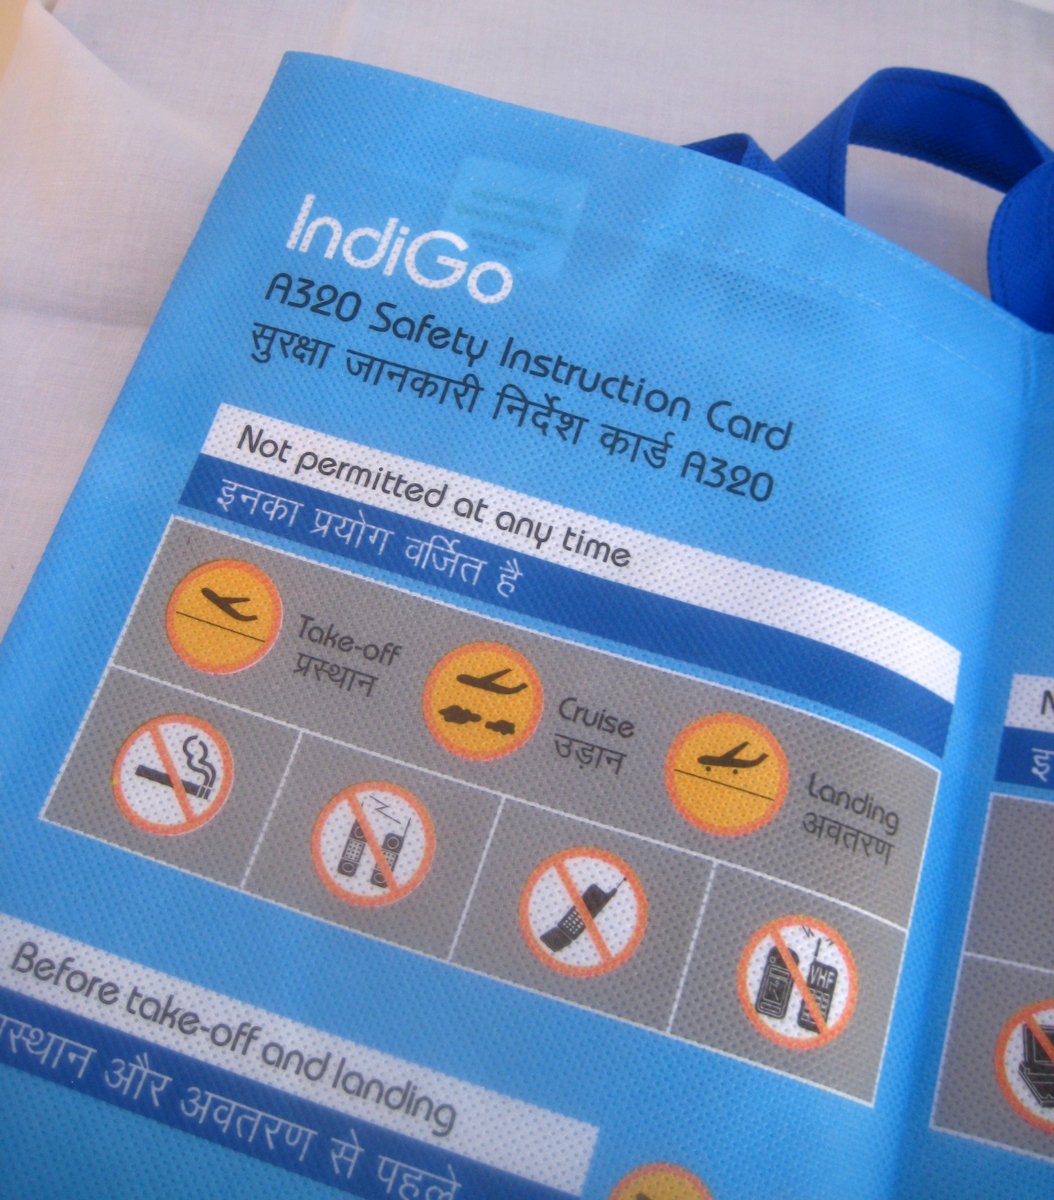 Indigo Airlines Tote Bag - Facsimile of Safety Card